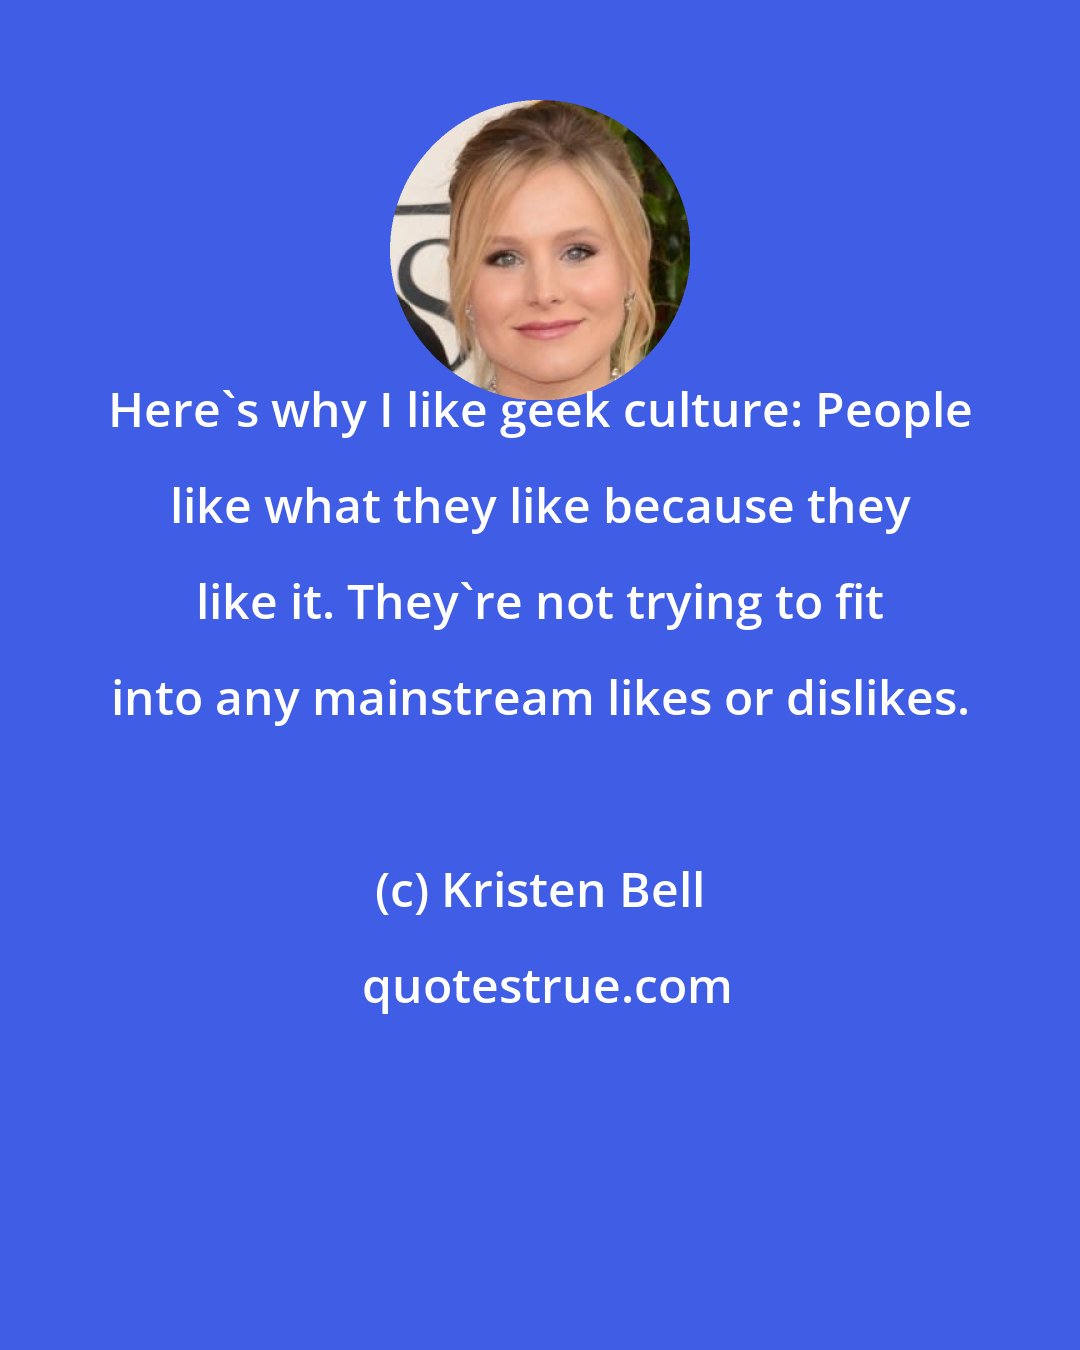 Kristen Bell: Here's why I like geek culture: People like what they like because they like it. They're not trying to fit into any mainstream likes or dislikes.